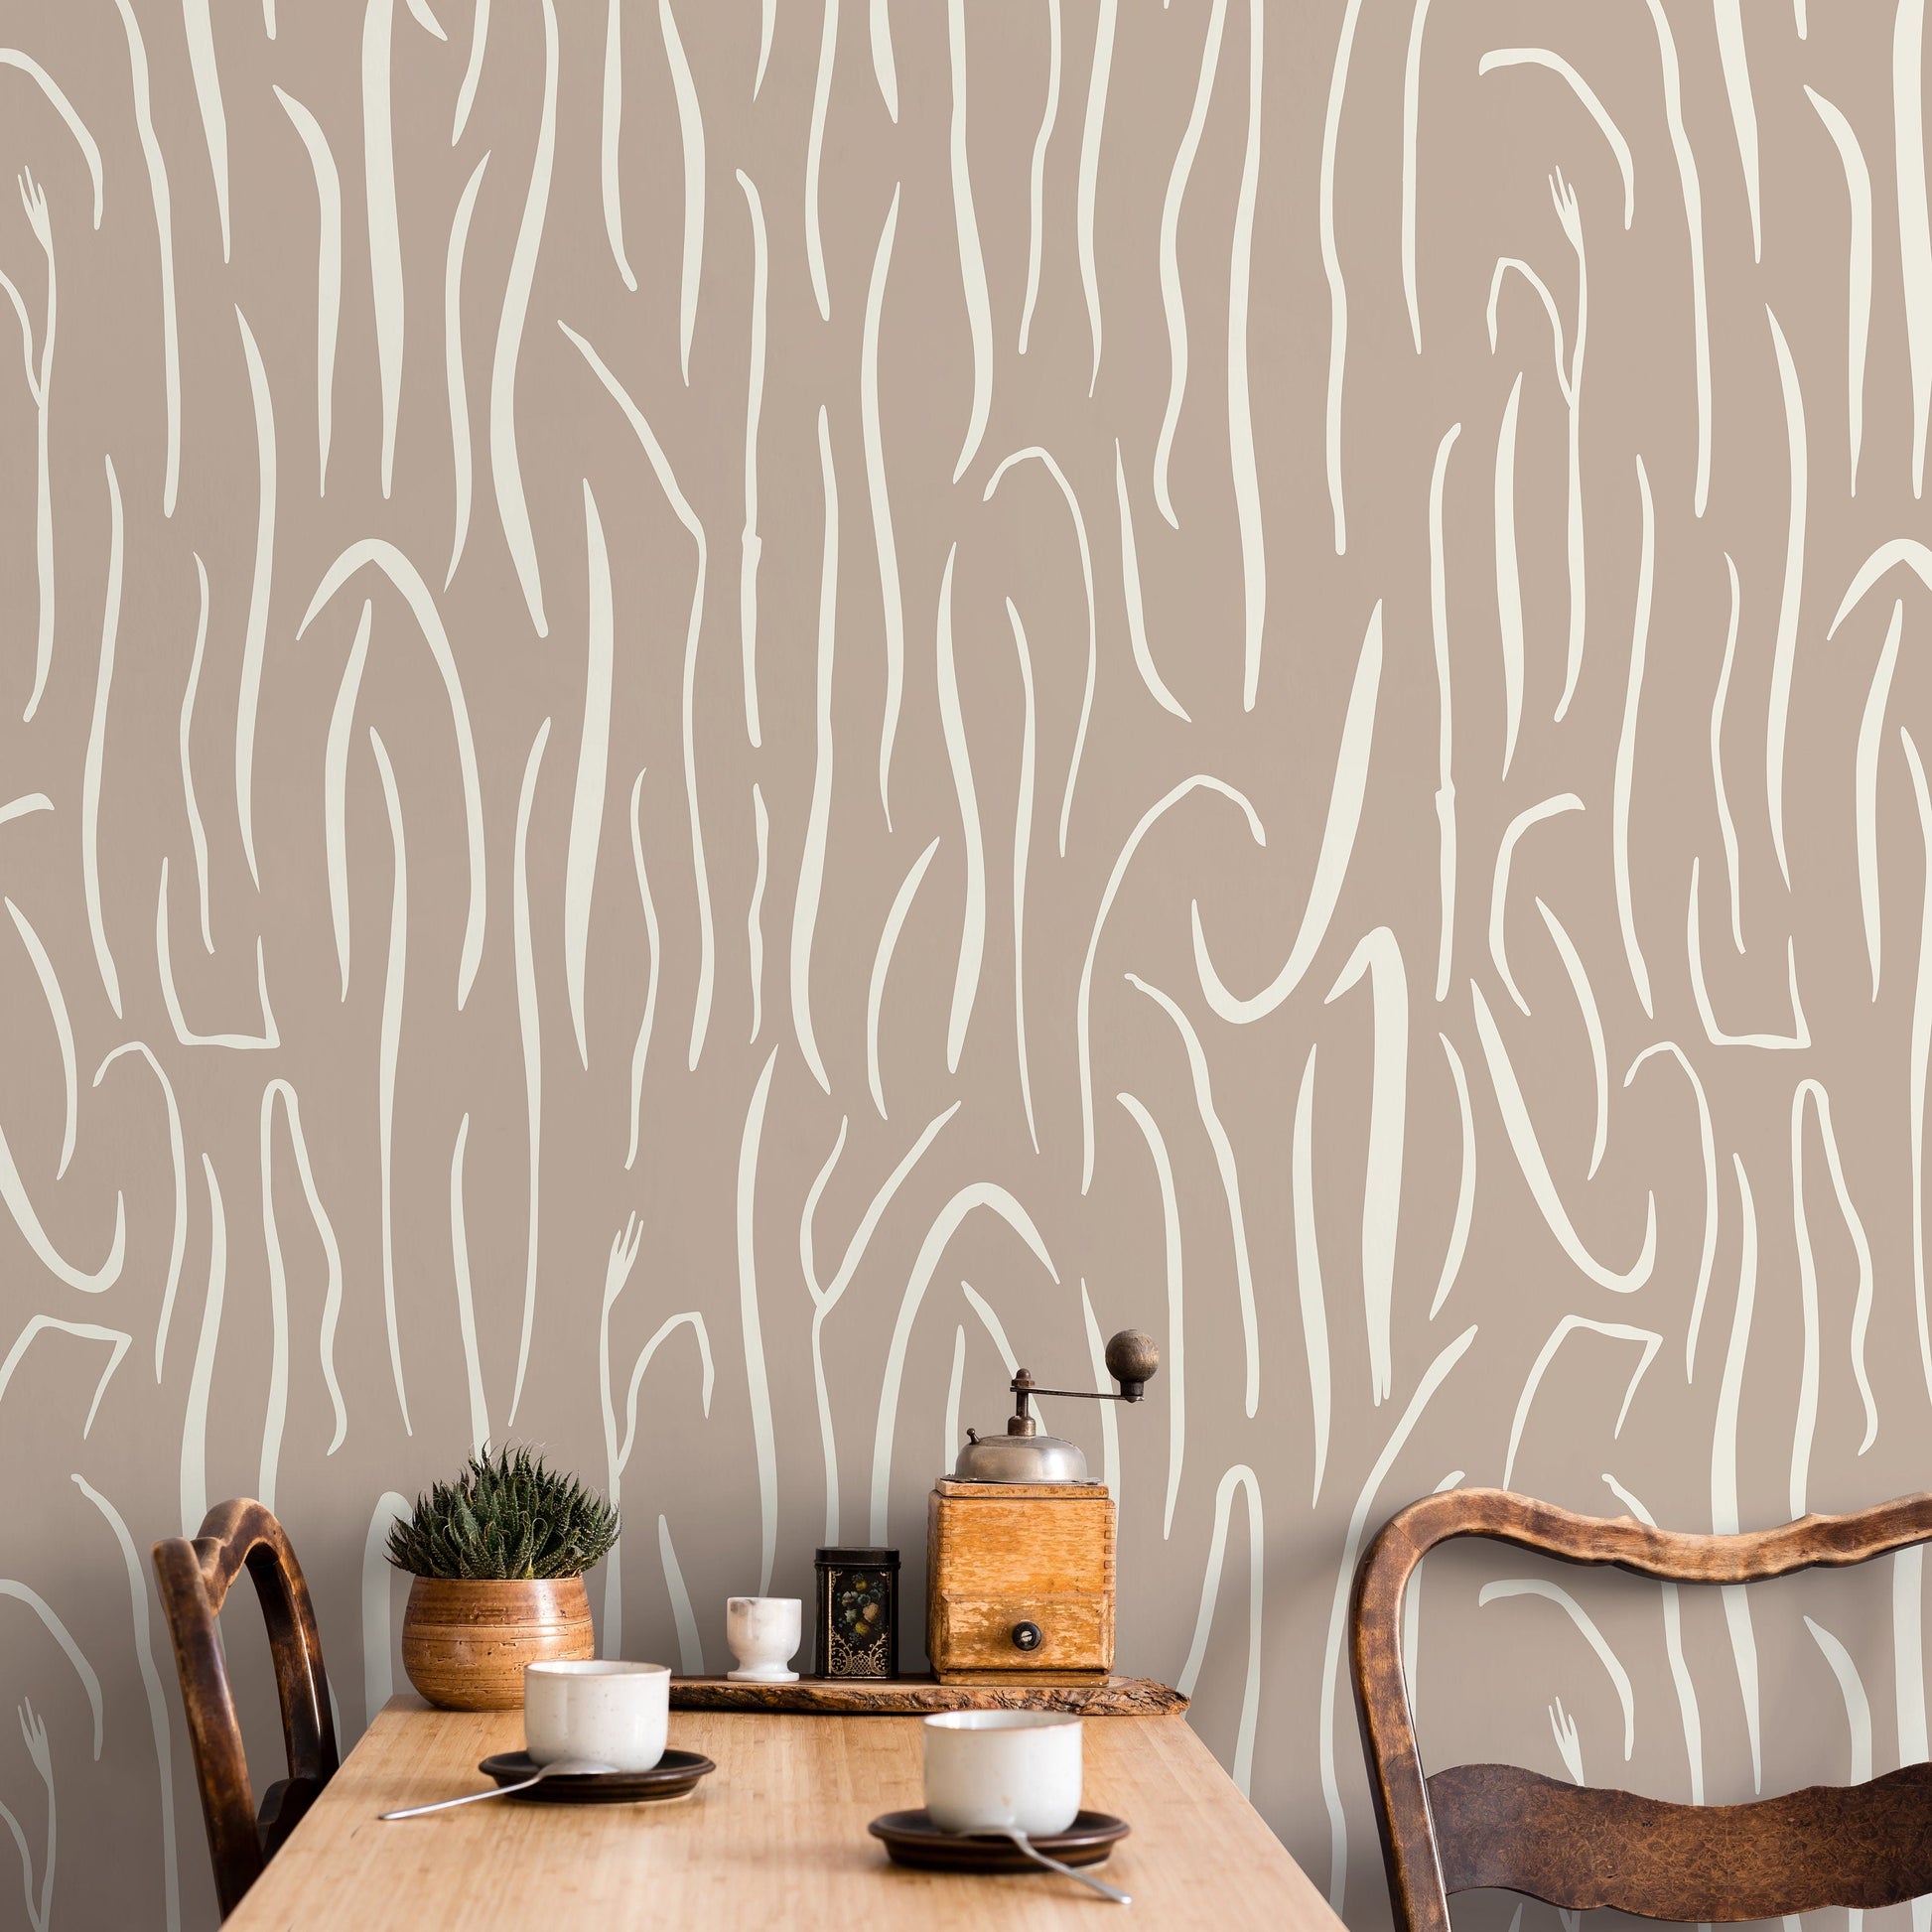 Beige Abstract Leaf Wallpaper Boho Wallpaper Peel and Stick and Traditional Wallpaper - D617